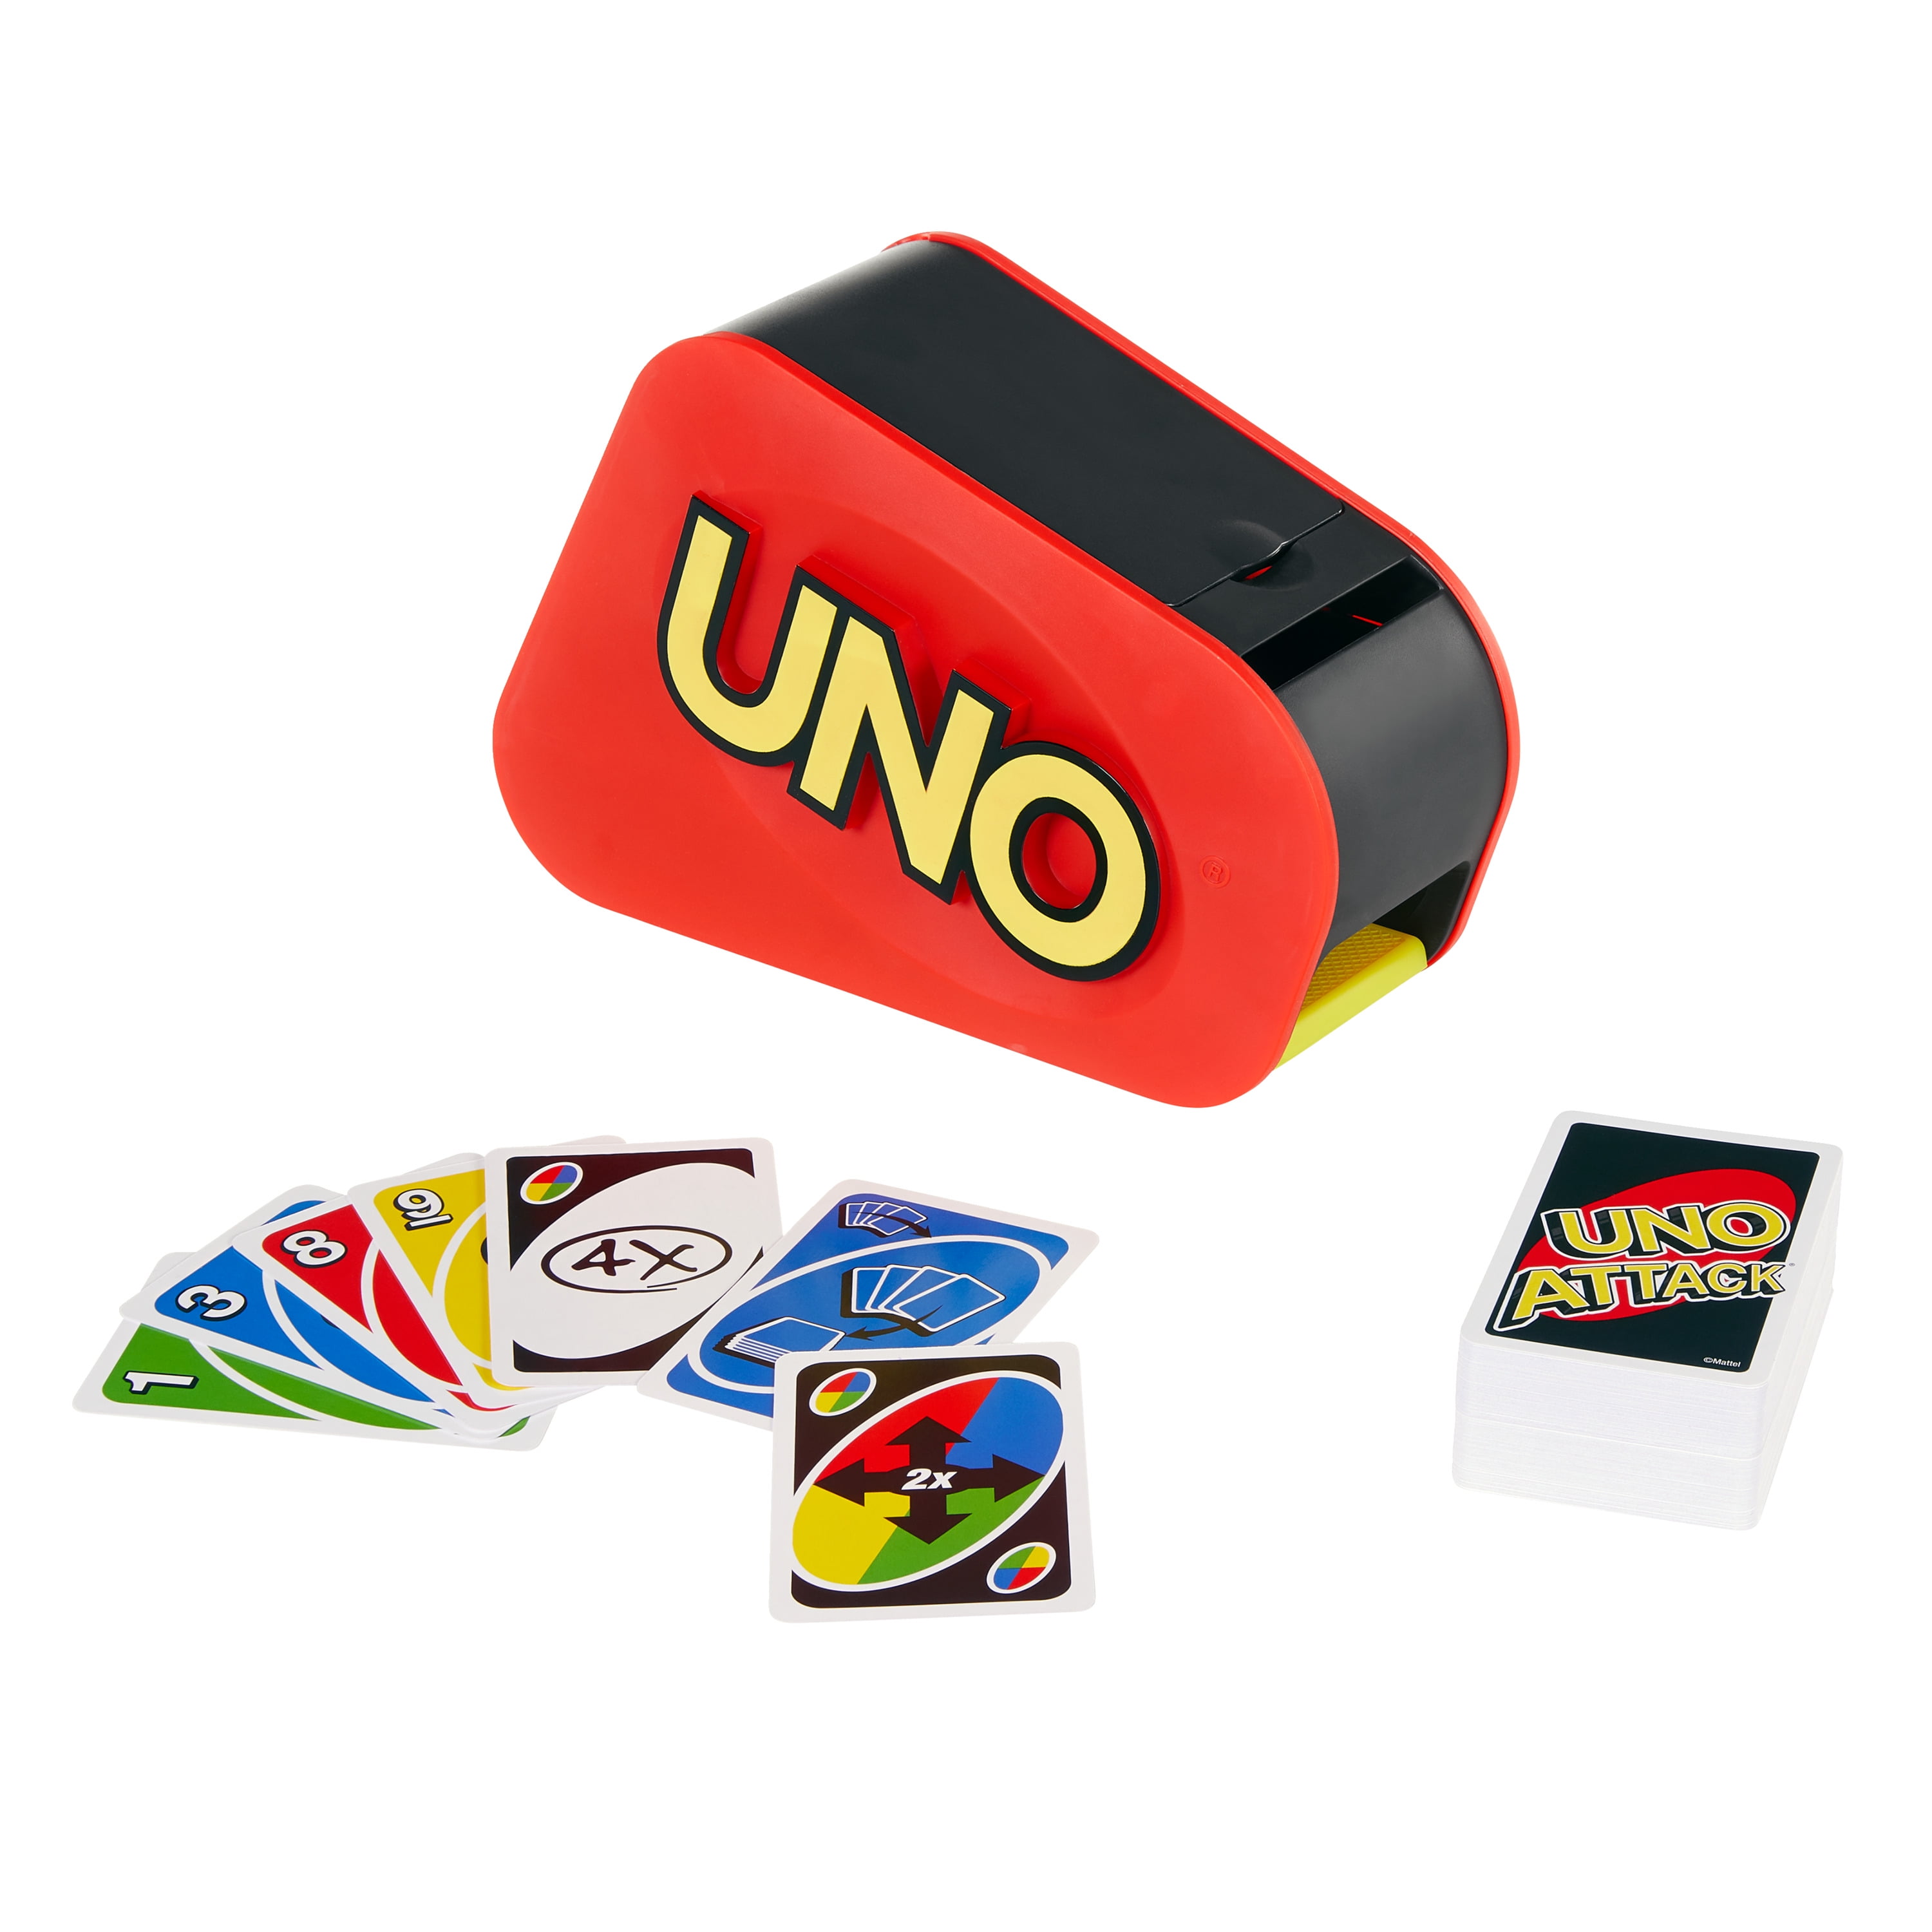 UNO Show 'Em NO MERCY Brutal, Ruthless, Unapologetic, Card Game 